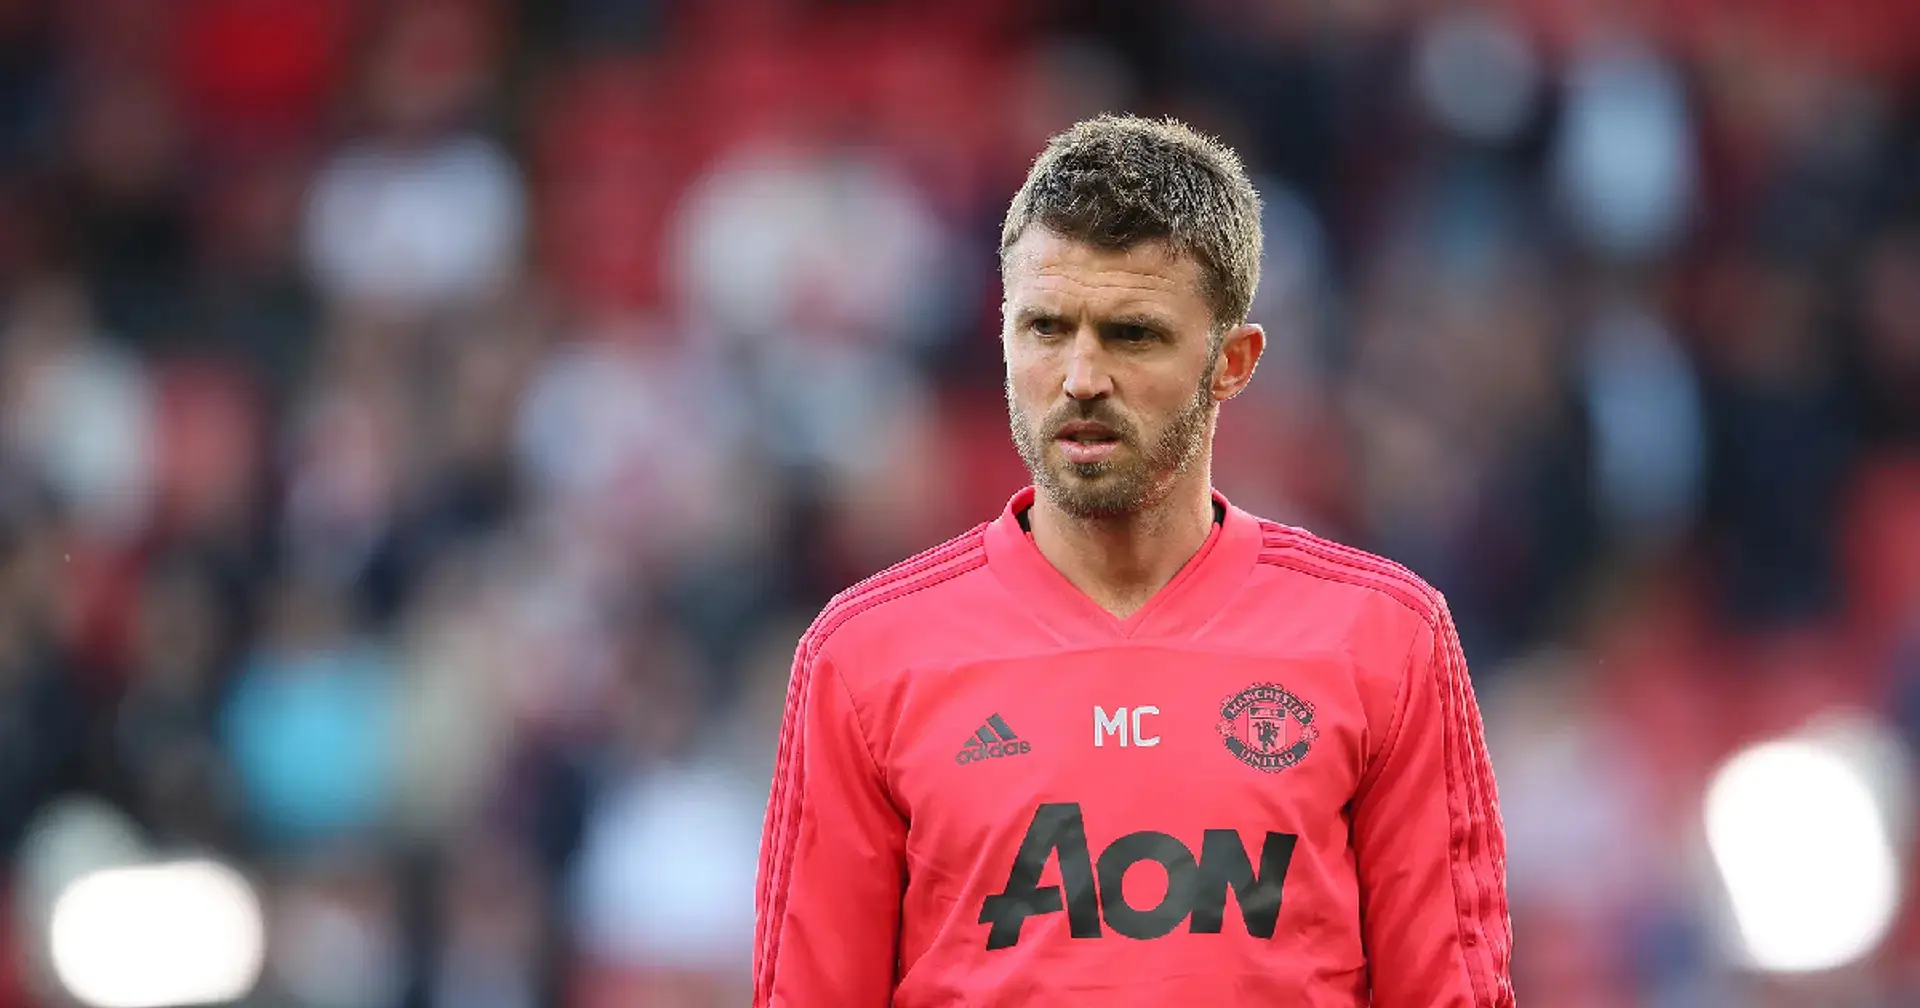 'We fully believe in the boys': Michael Carrick's message for Man United ahead of West Ham clash